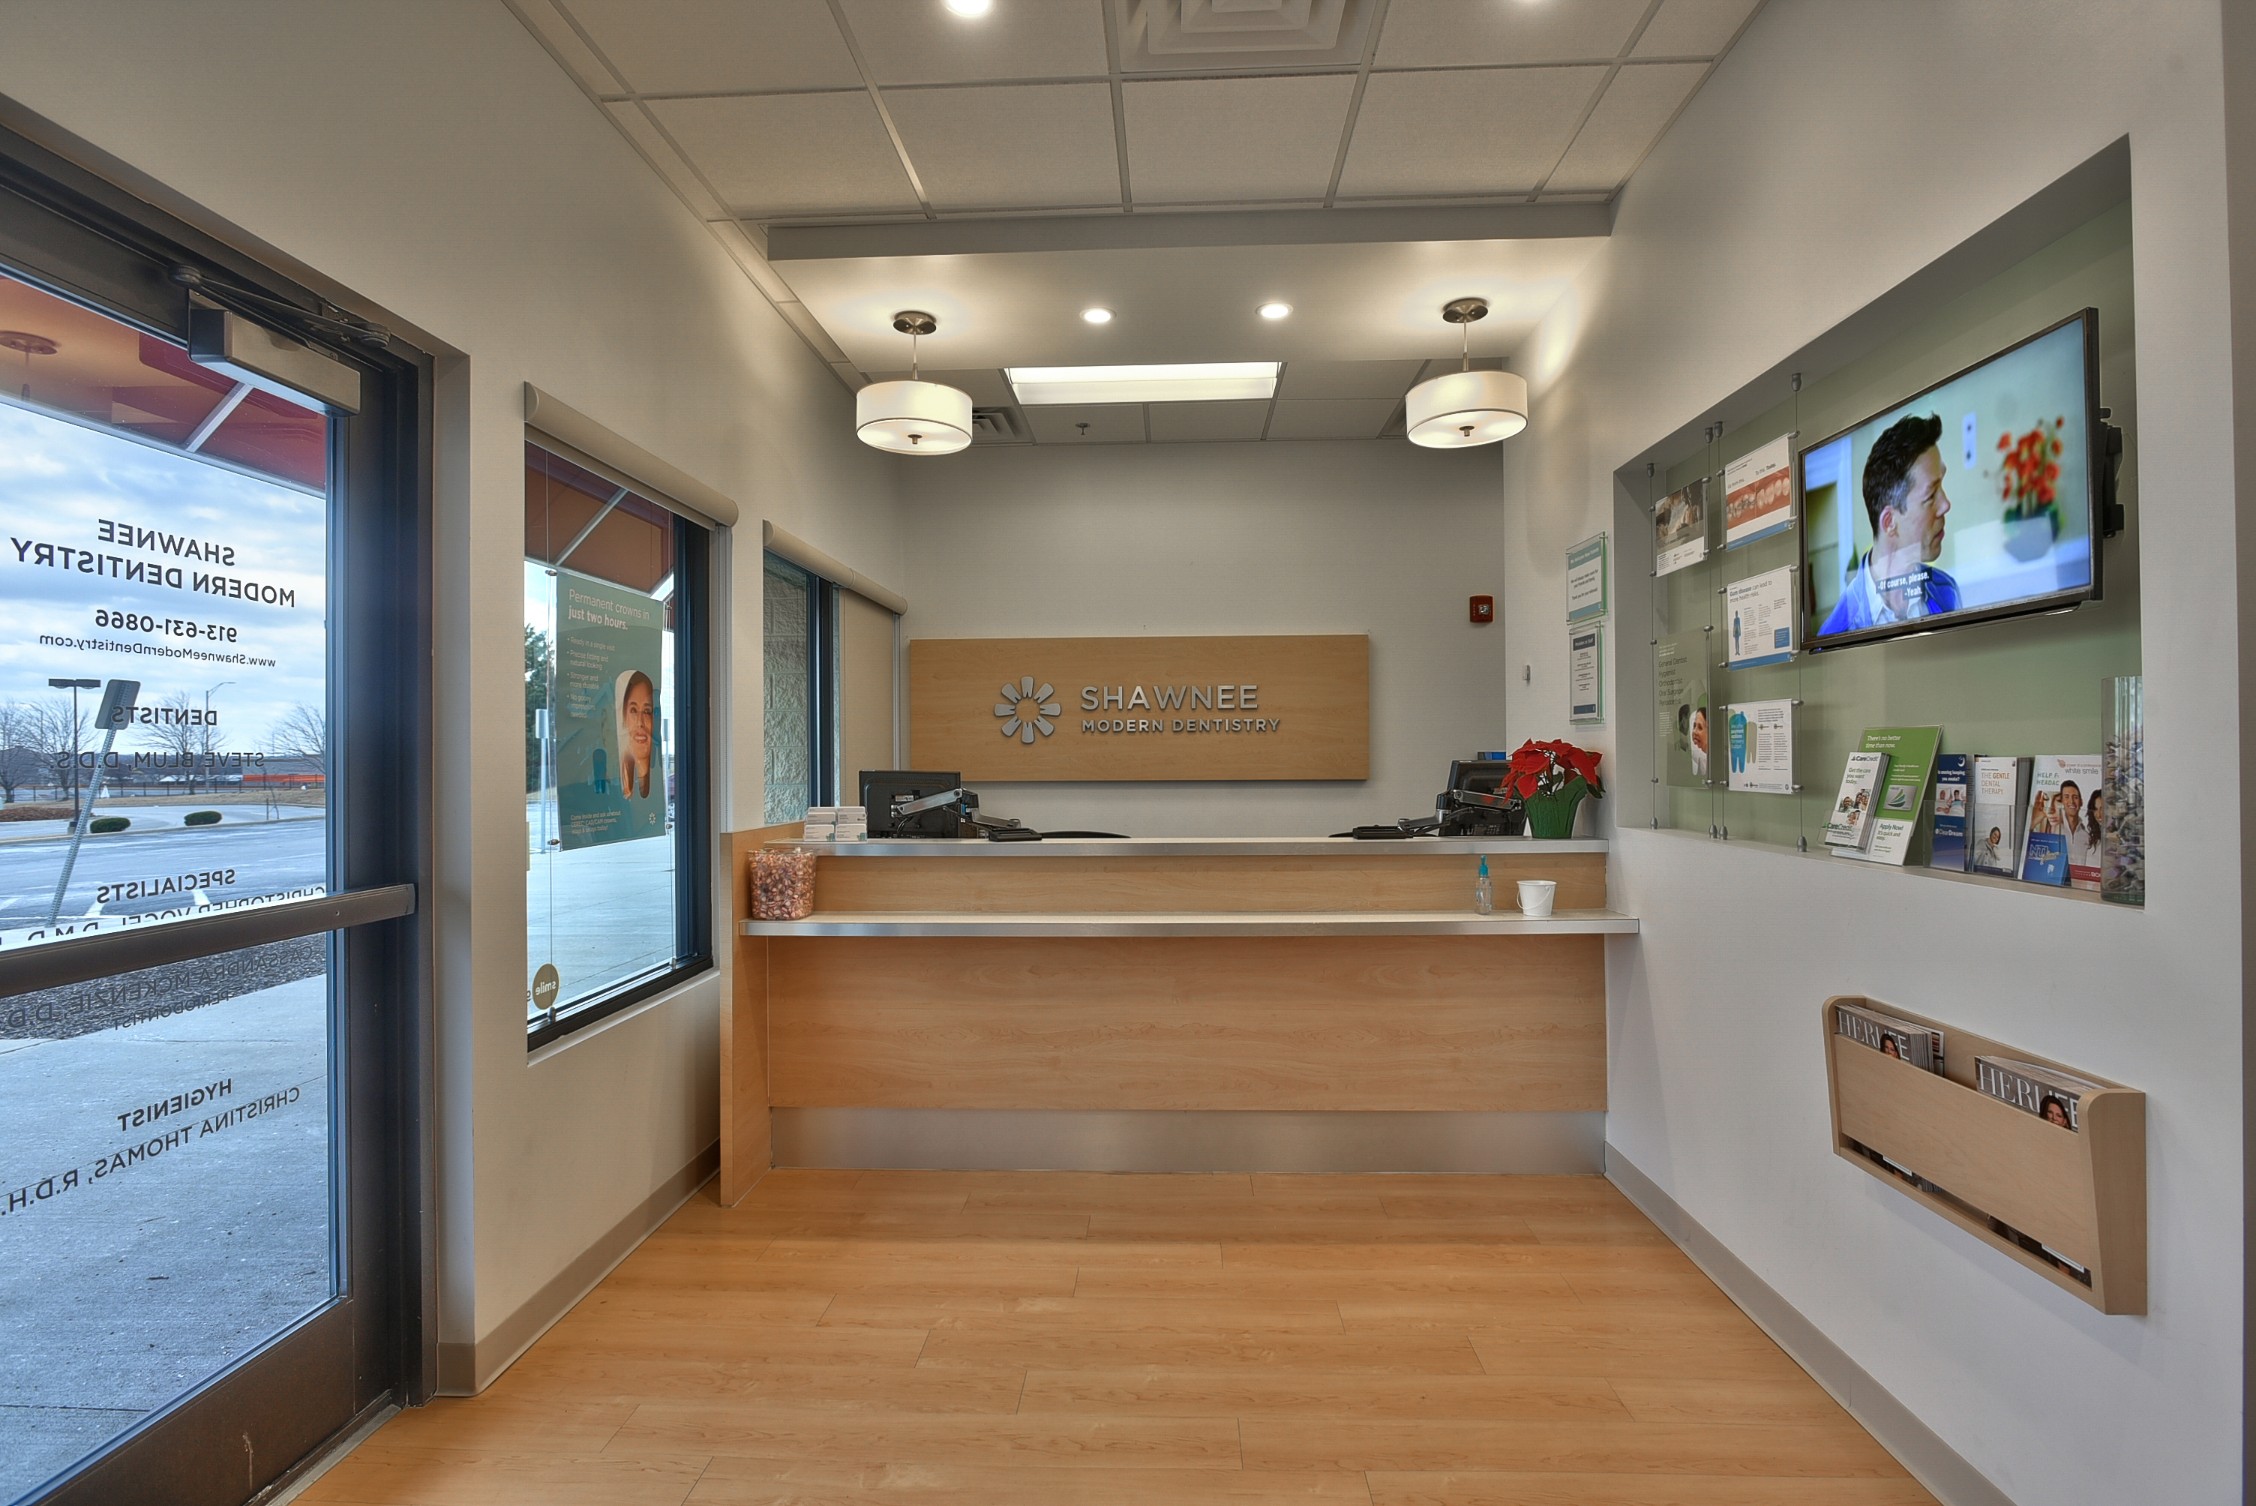 Shawnee Modern Dentistry opened its doors to the Shawnee community in July 2015.